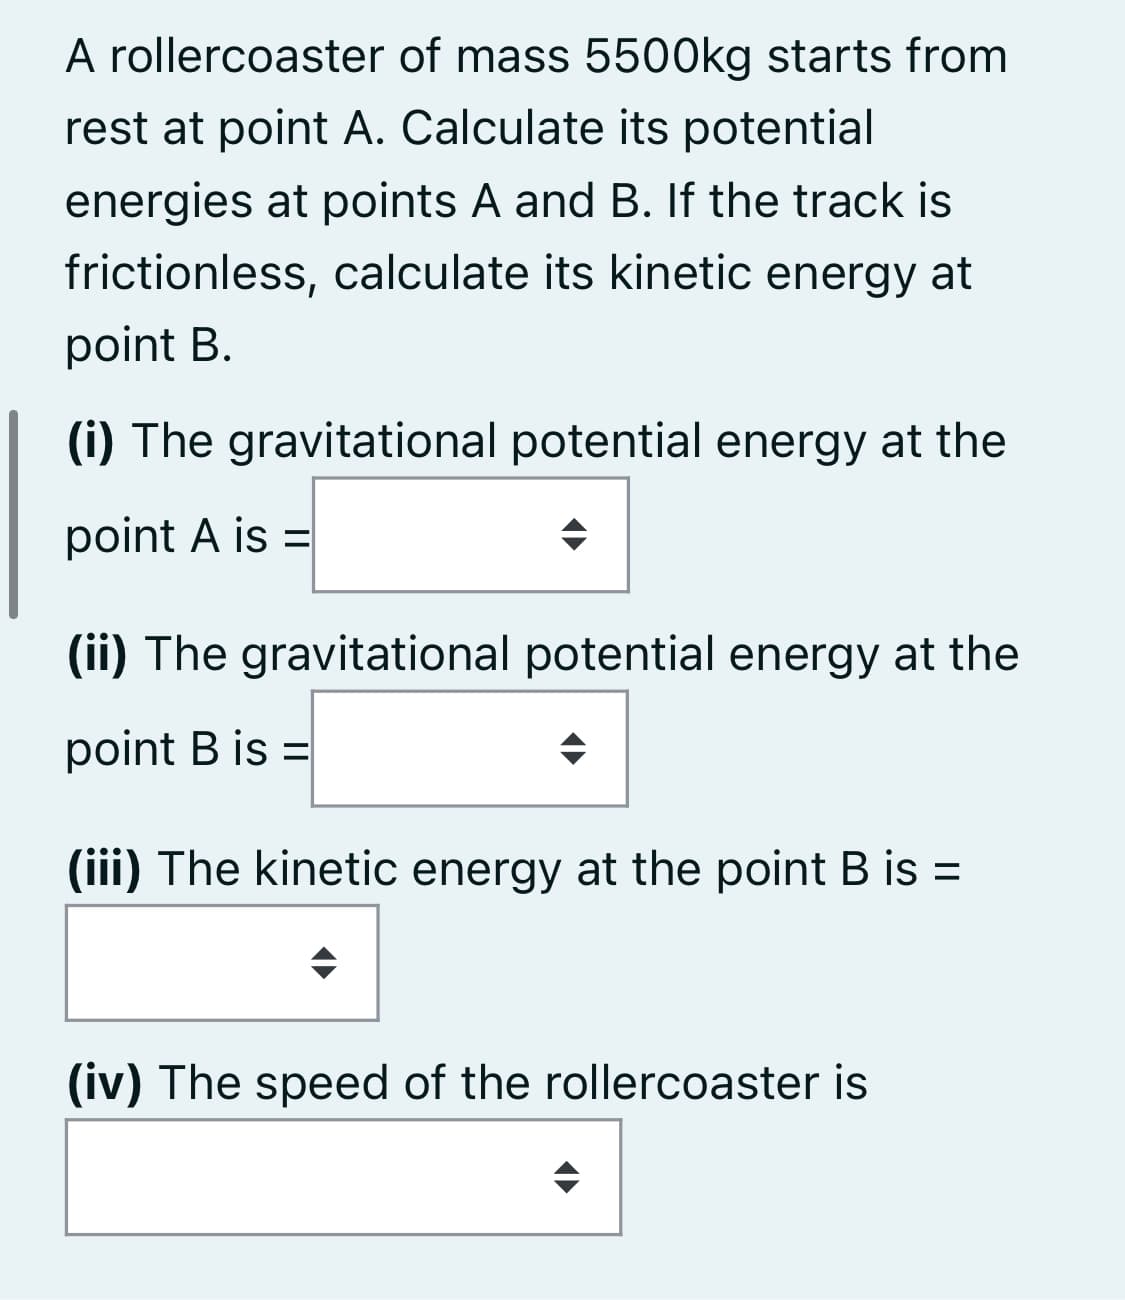 A rollercoaster of mass 5500kg starts from
rest at point A. Calculate its potential
energies at points A and B. If the track is
frictionless, calculate its kinetic energy at
point B.
(i) The gravitational potential energy at the
point A is =
(ii) The gravitational potential energy at the
point B is =
%3D
(iii) The kinetic energy at the point B is =
(iv) The speed of the rollercoaster is
